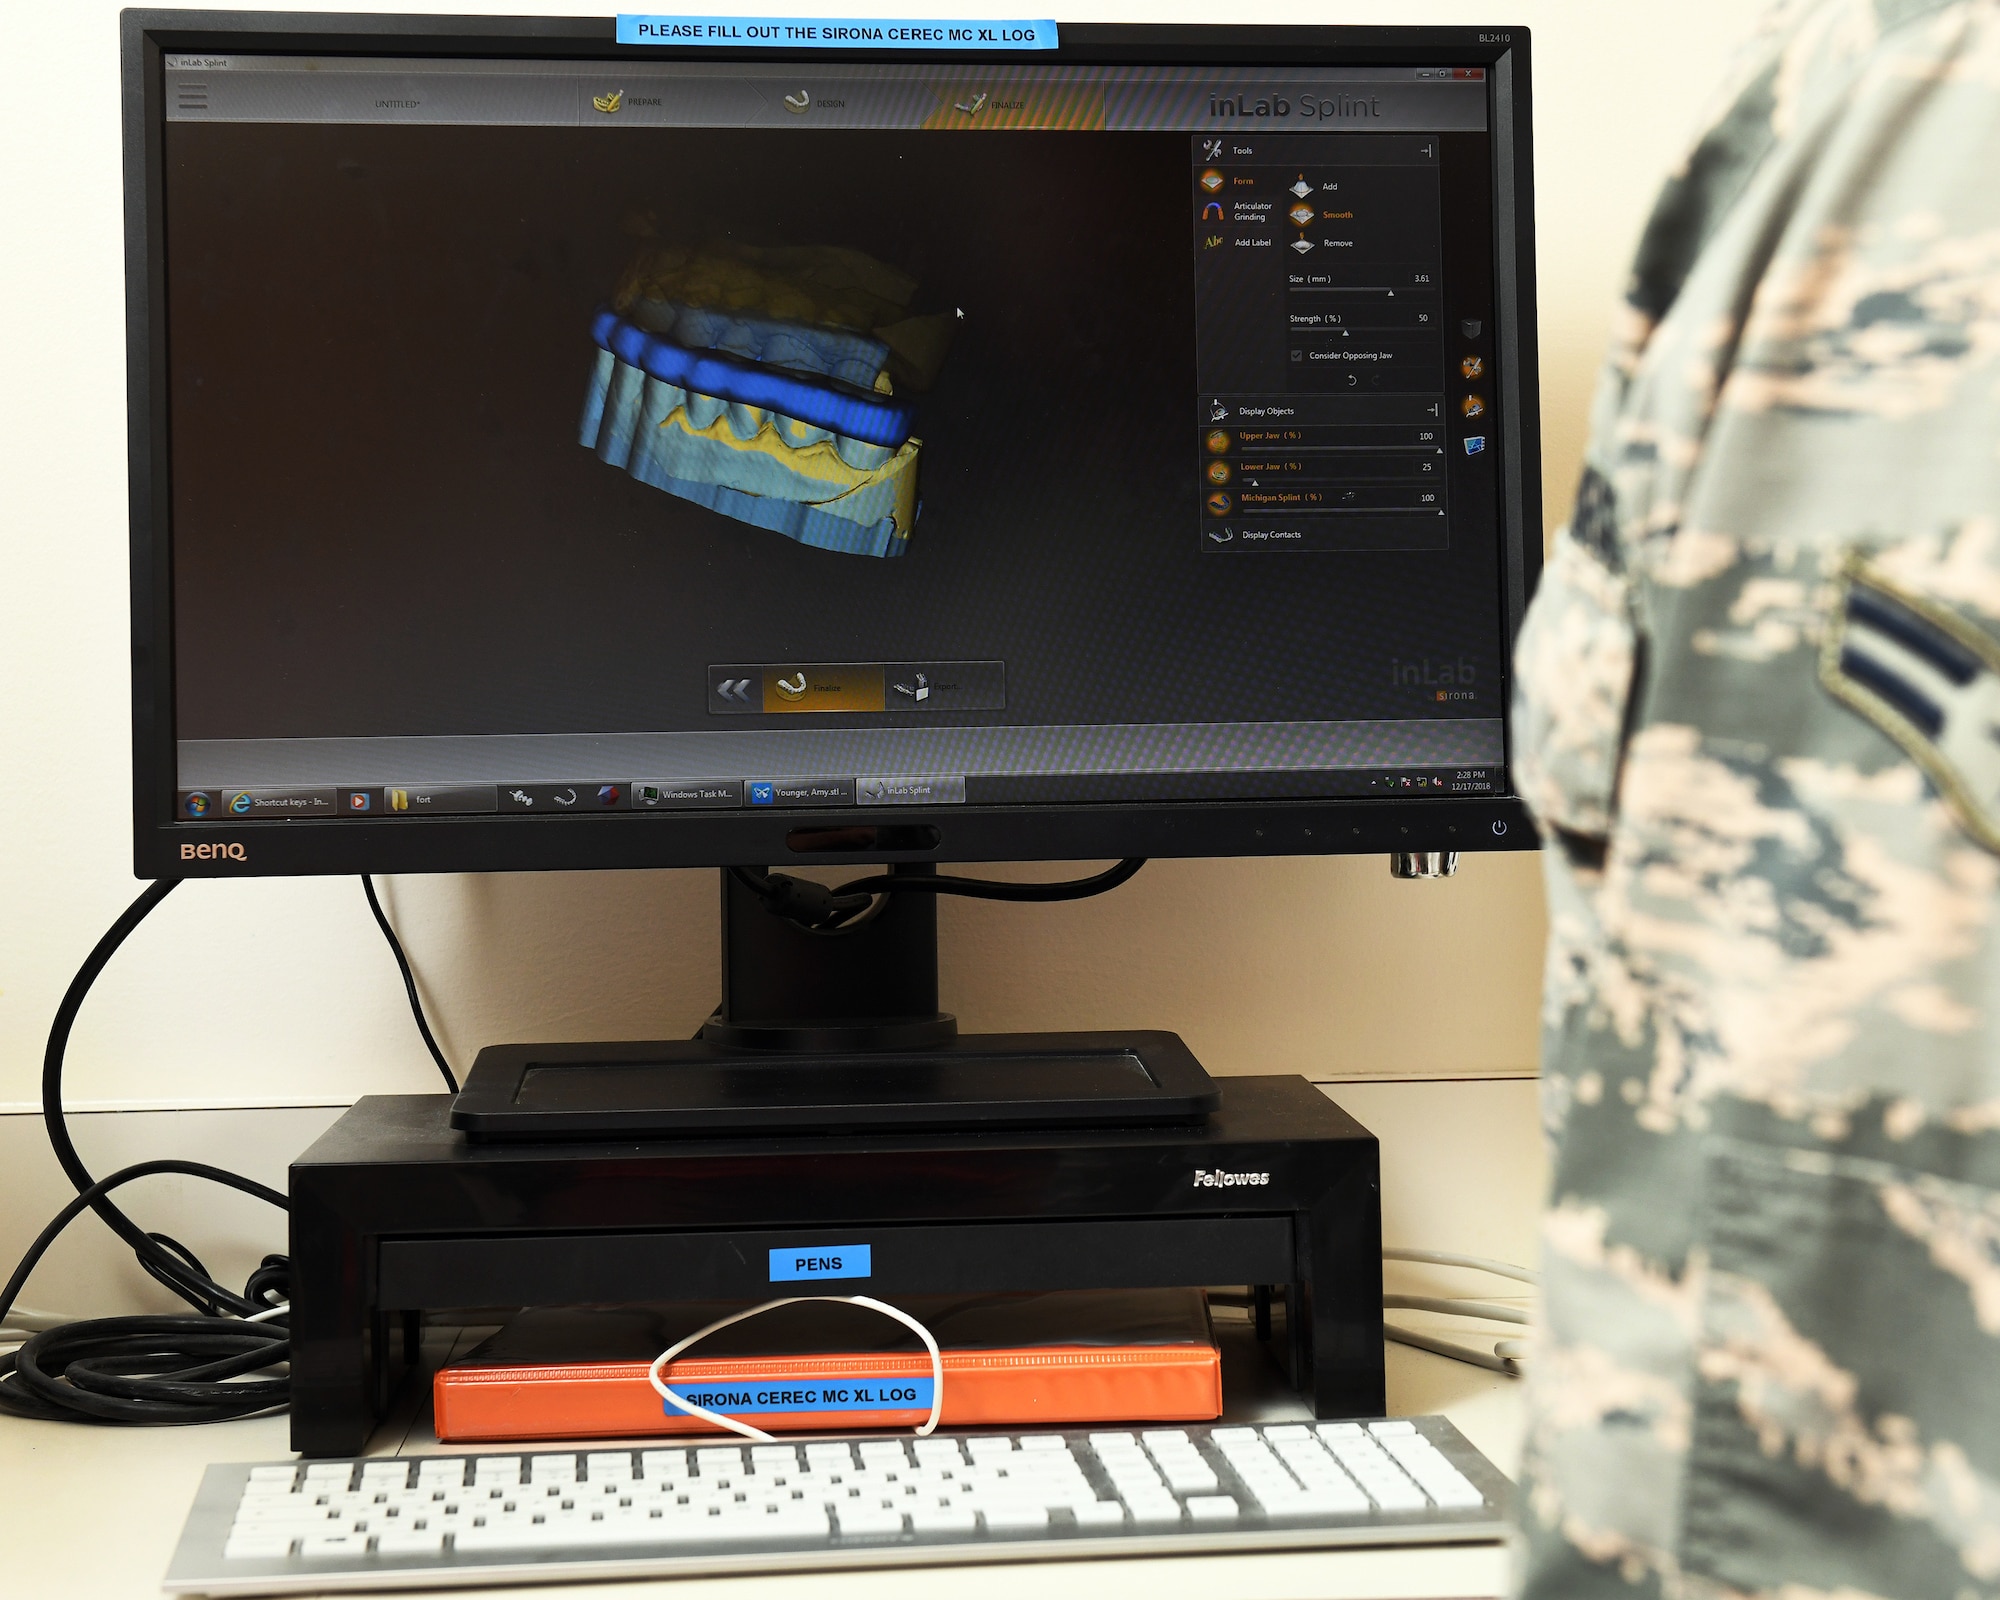 A Formlabs Form2 printer operated by Airmen with the 60th Dental Squadron prints a dental guard at Travis Air Force Base, California, Dec. 17, 2018. The printer was purchased with Squadron Innovation Funds provided by the U.S. Air Force Chief of Staff, Gen. David Goldfein. The Form2 printer is a stereolithographic 3D multiple resin printer designed for use in dentistry. The innovative printer reduces the manning hours required to produce dental prosthetics by up to 85 percent, cutting hands-on production time from three hours to 30 minutes. (U.S. Air Force photo by Louis Briscese)